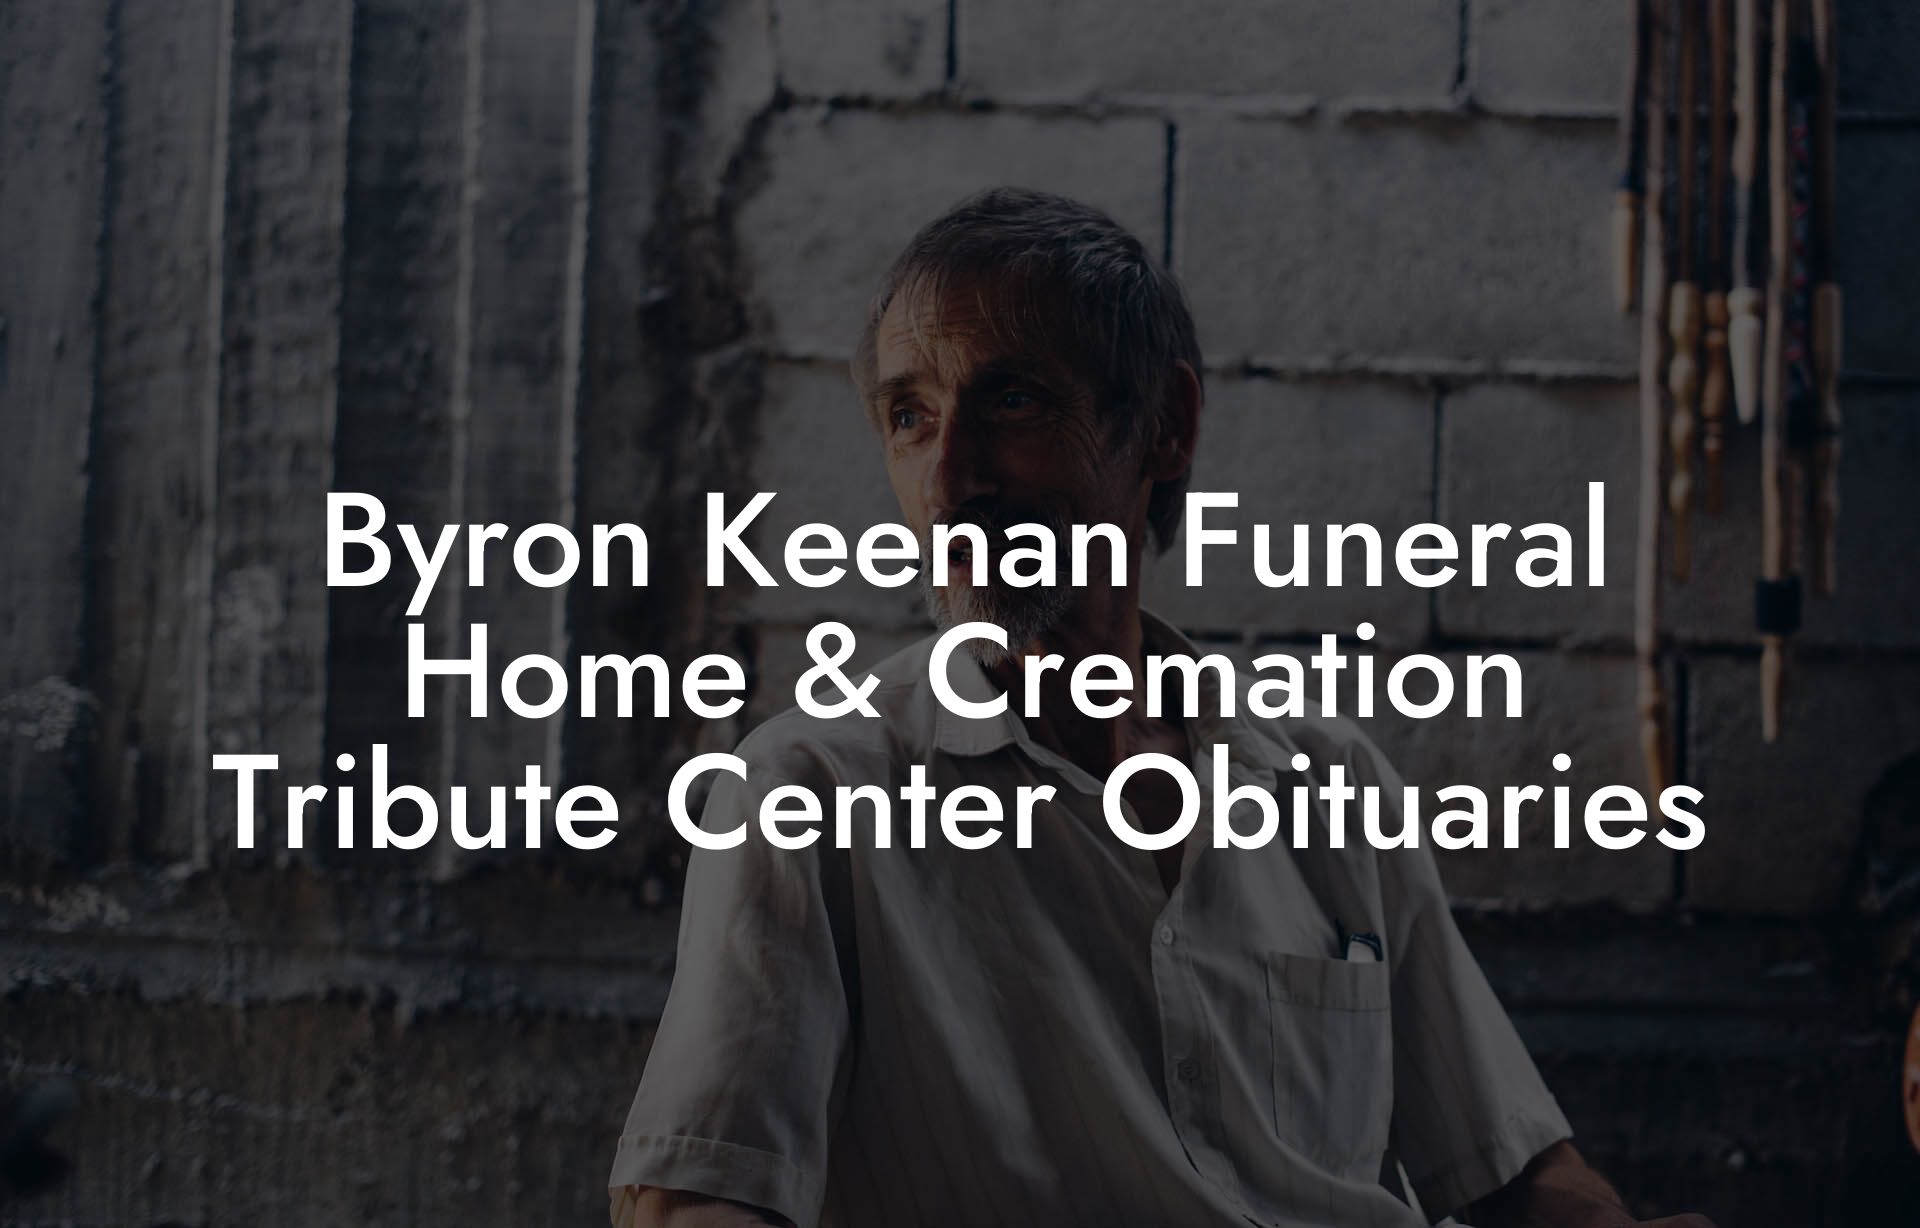 Byron Keenan Funeral Home & Cremation Tribute Center Obituaries